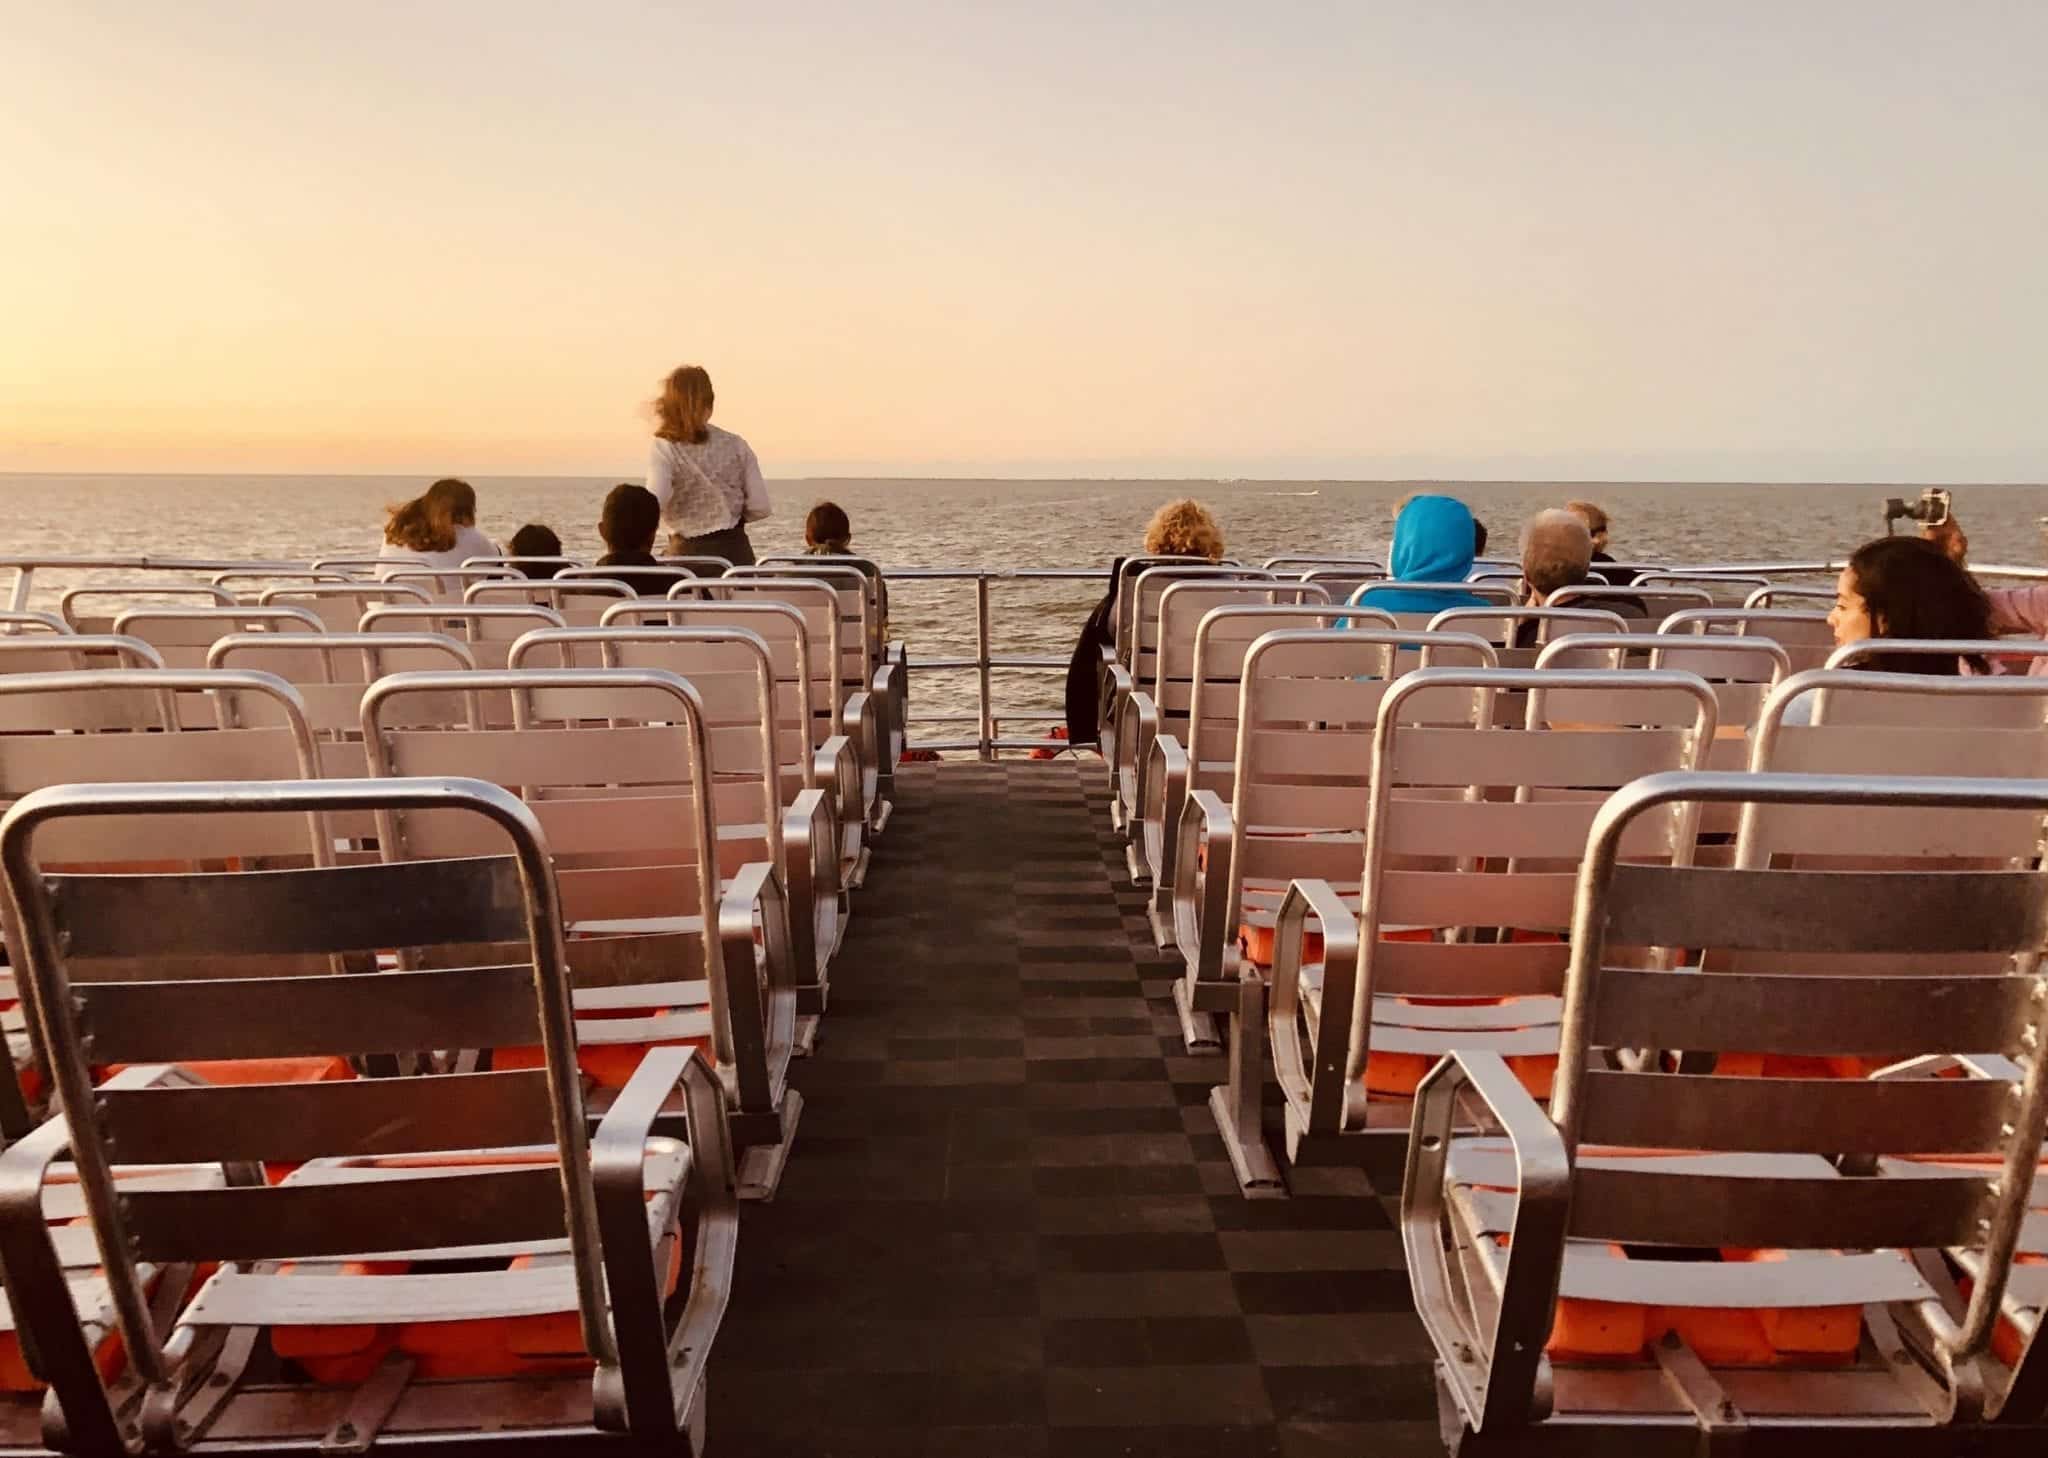 People sitting in chairs on a ferry.